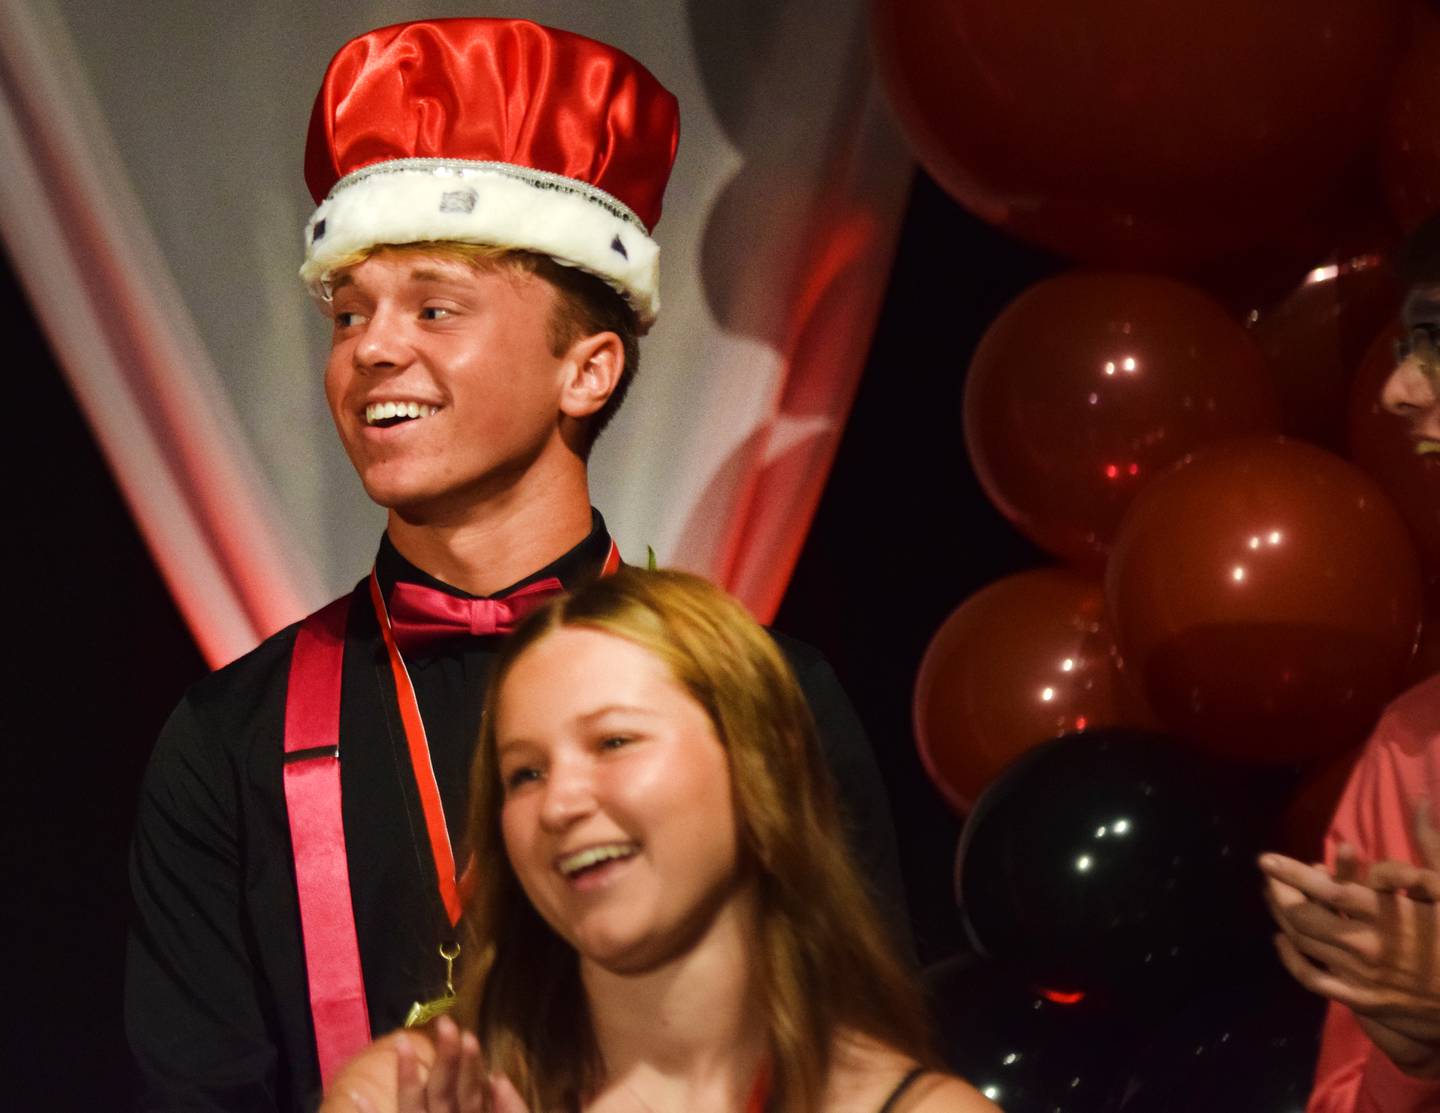 Brody Bauer, a senior at Newton High School, is crowned homecoming king on Sept. 15 during a coronation ceremony.